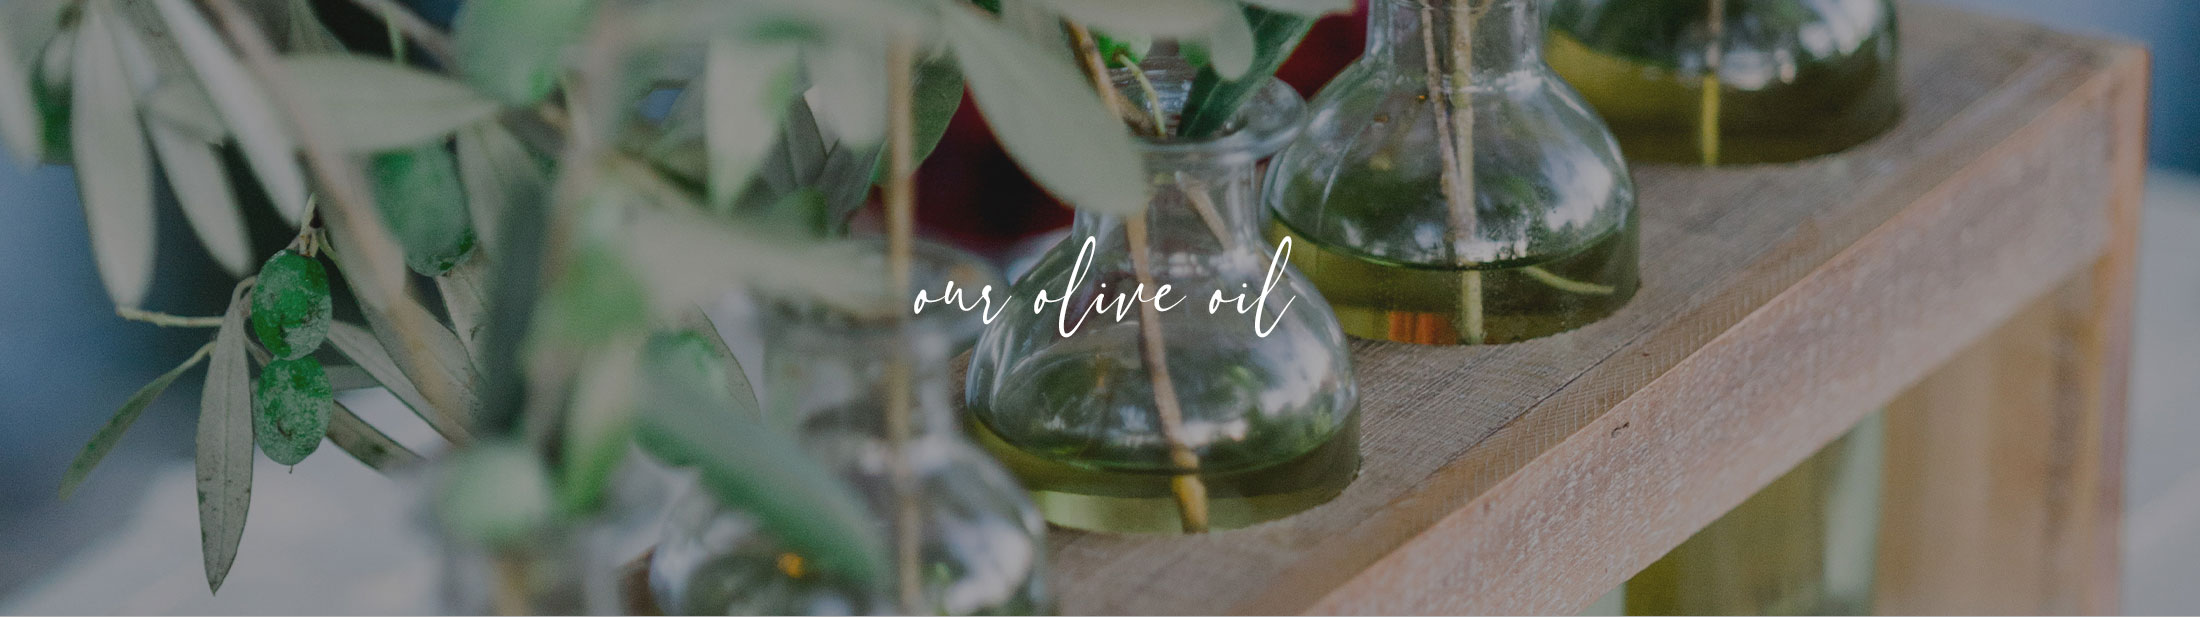 Our Olive oil